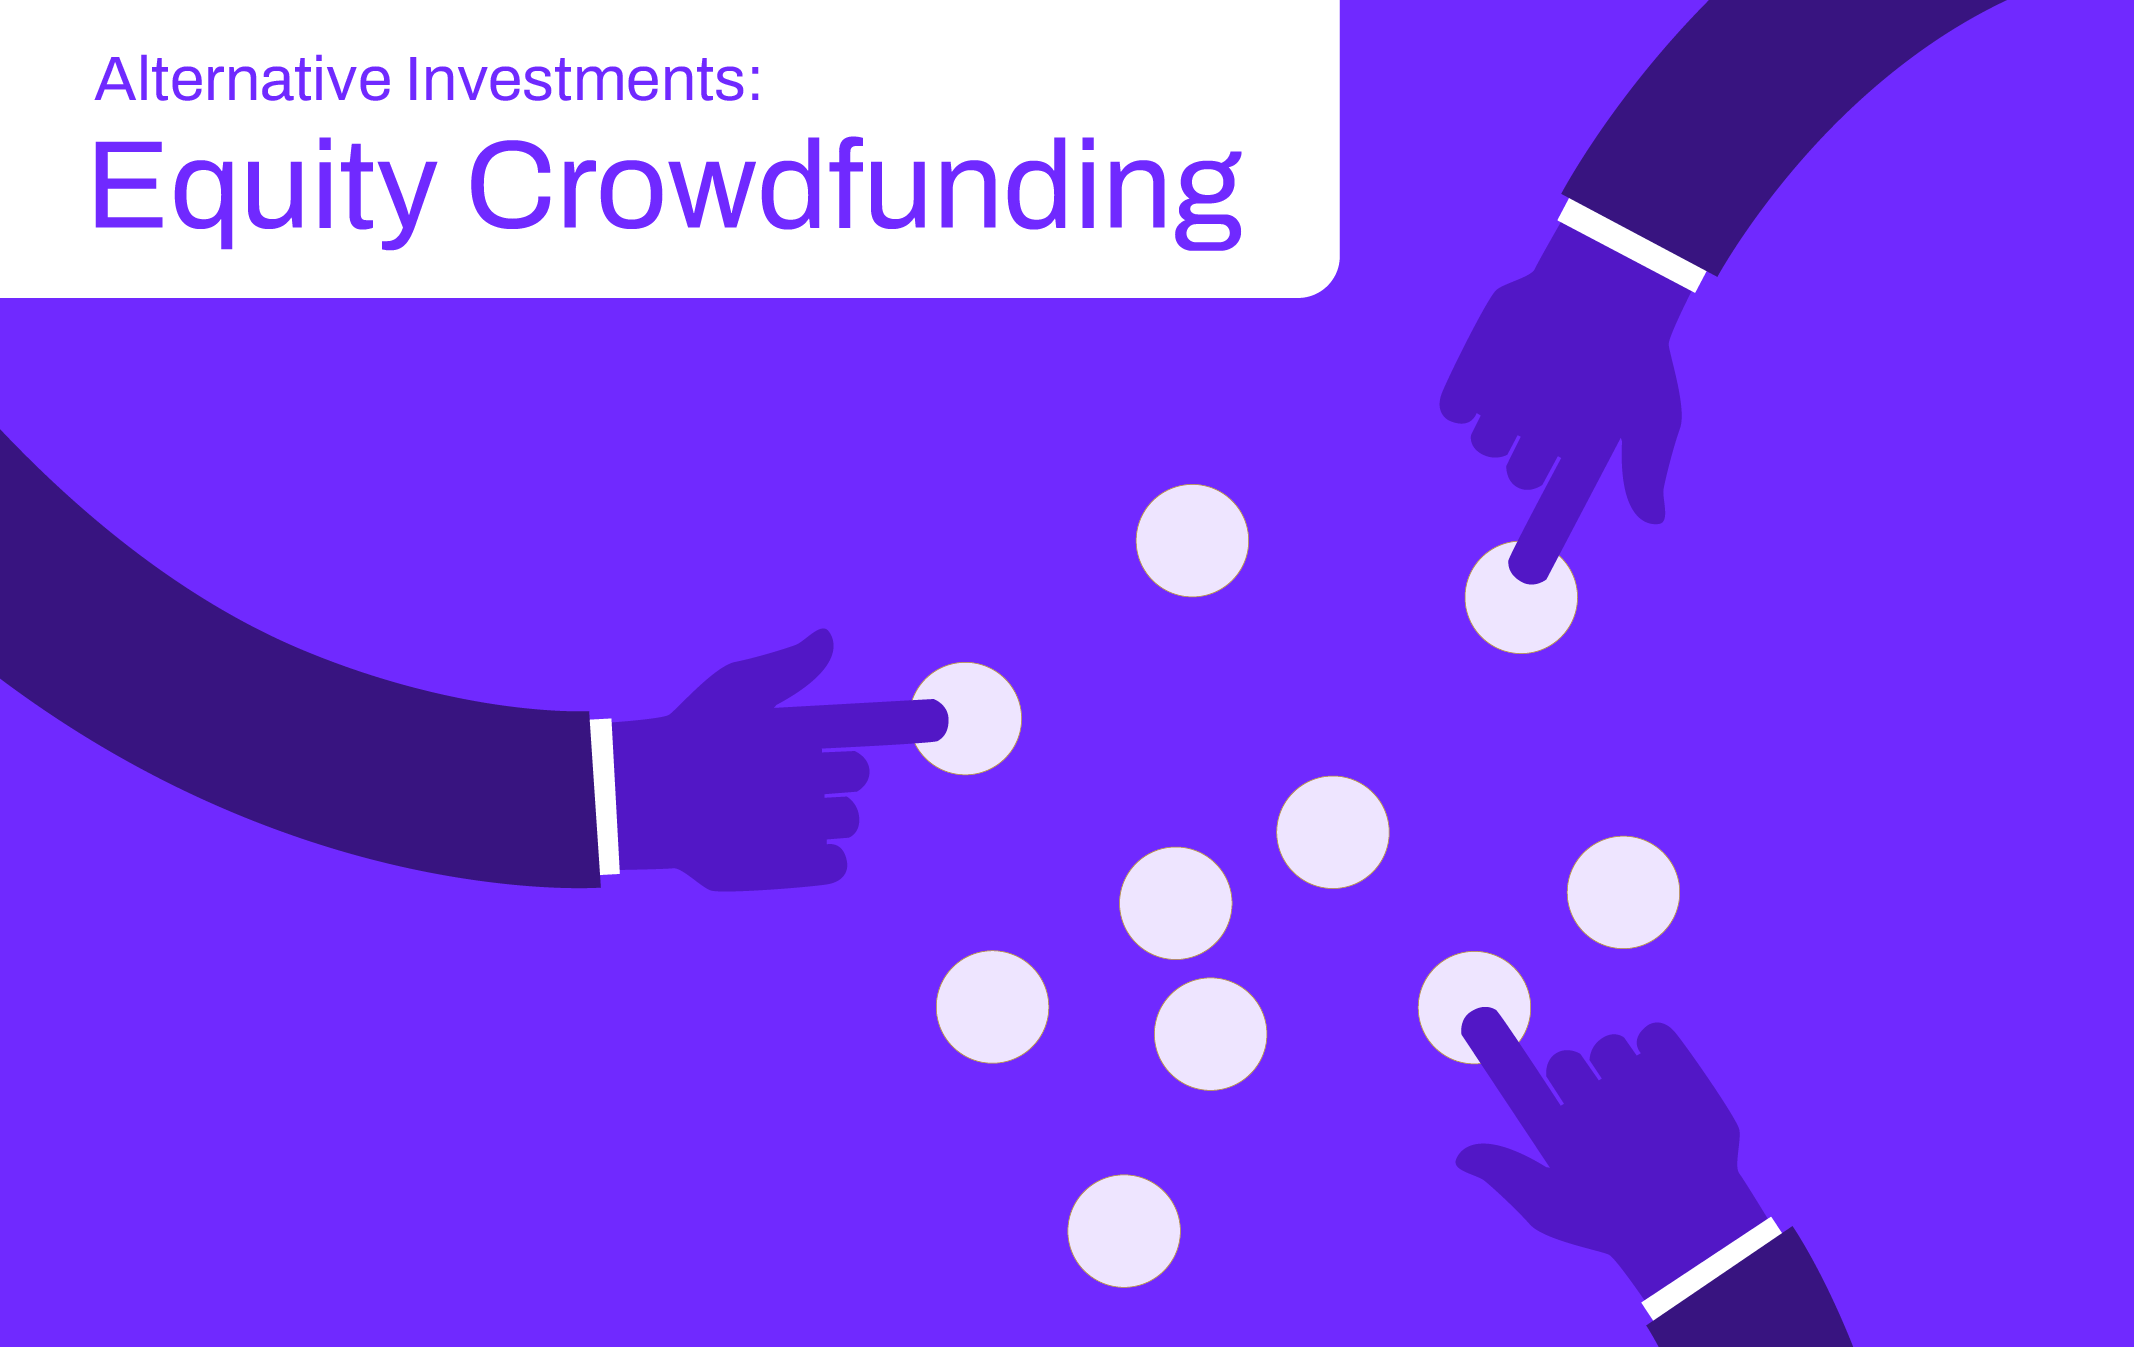 Looking into alternative investments? Equity crowdfunding is one asset to check out.